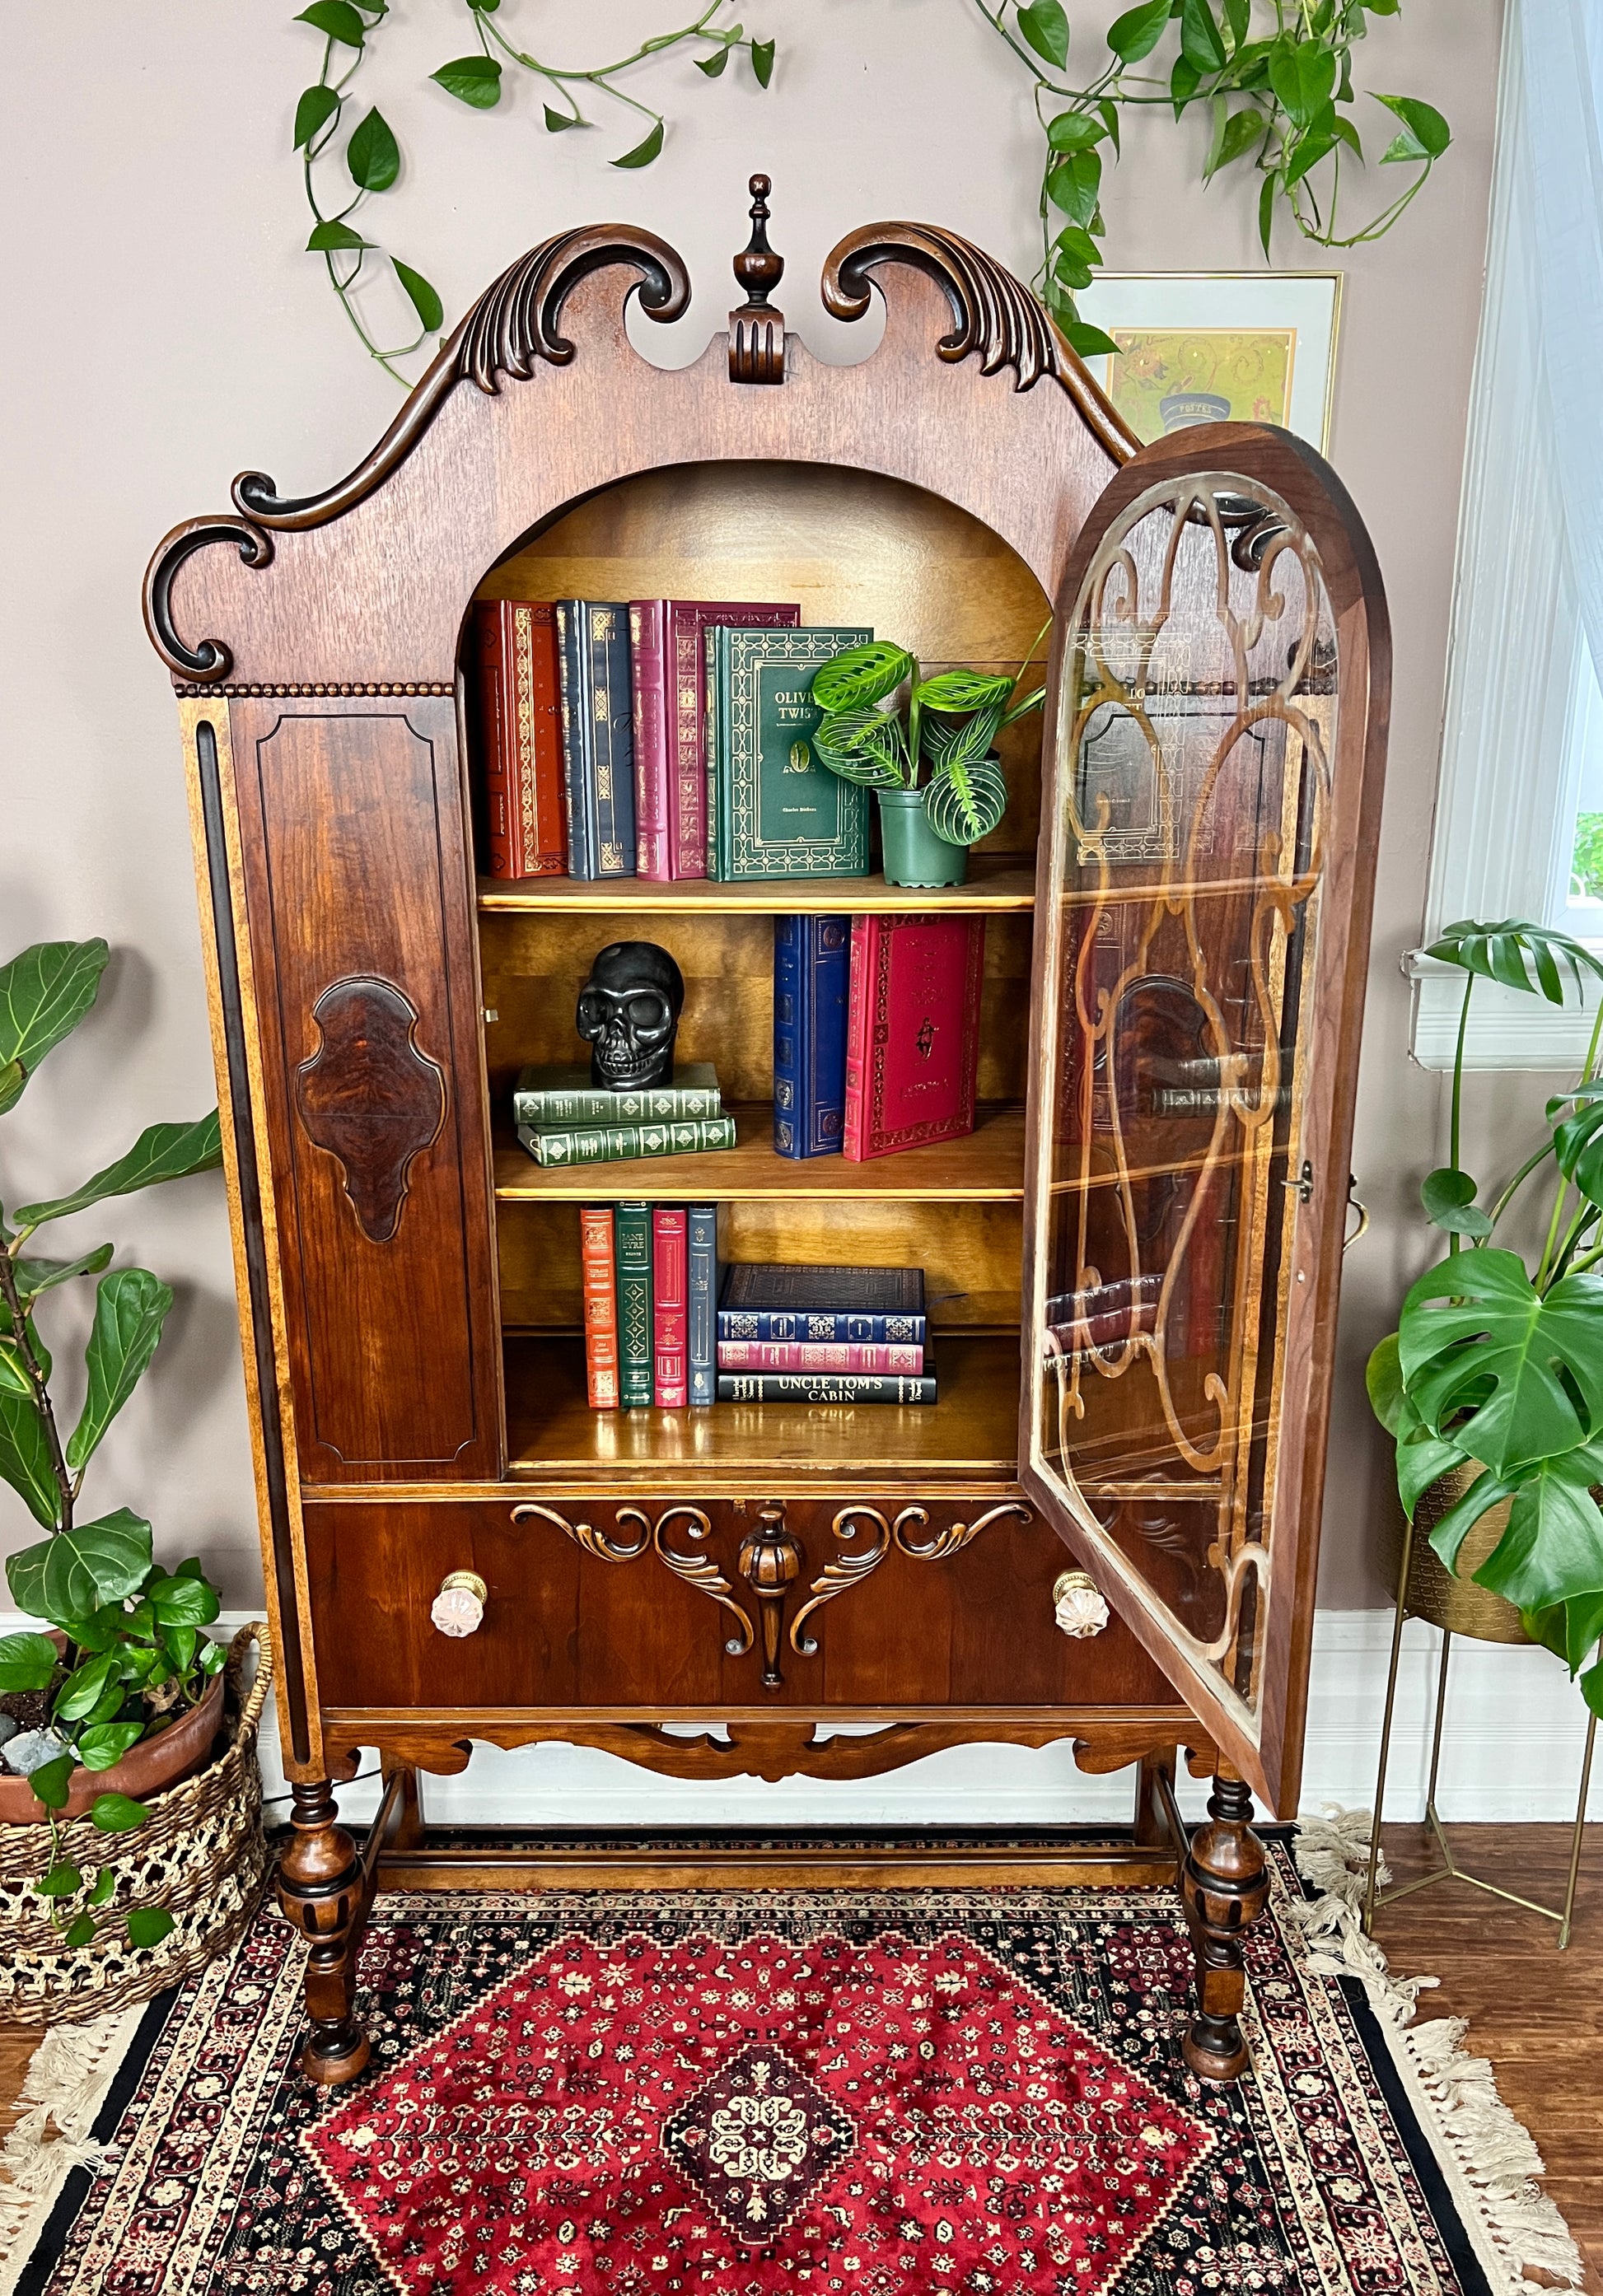 This is an antique china cabinet made from solid walnut wood.